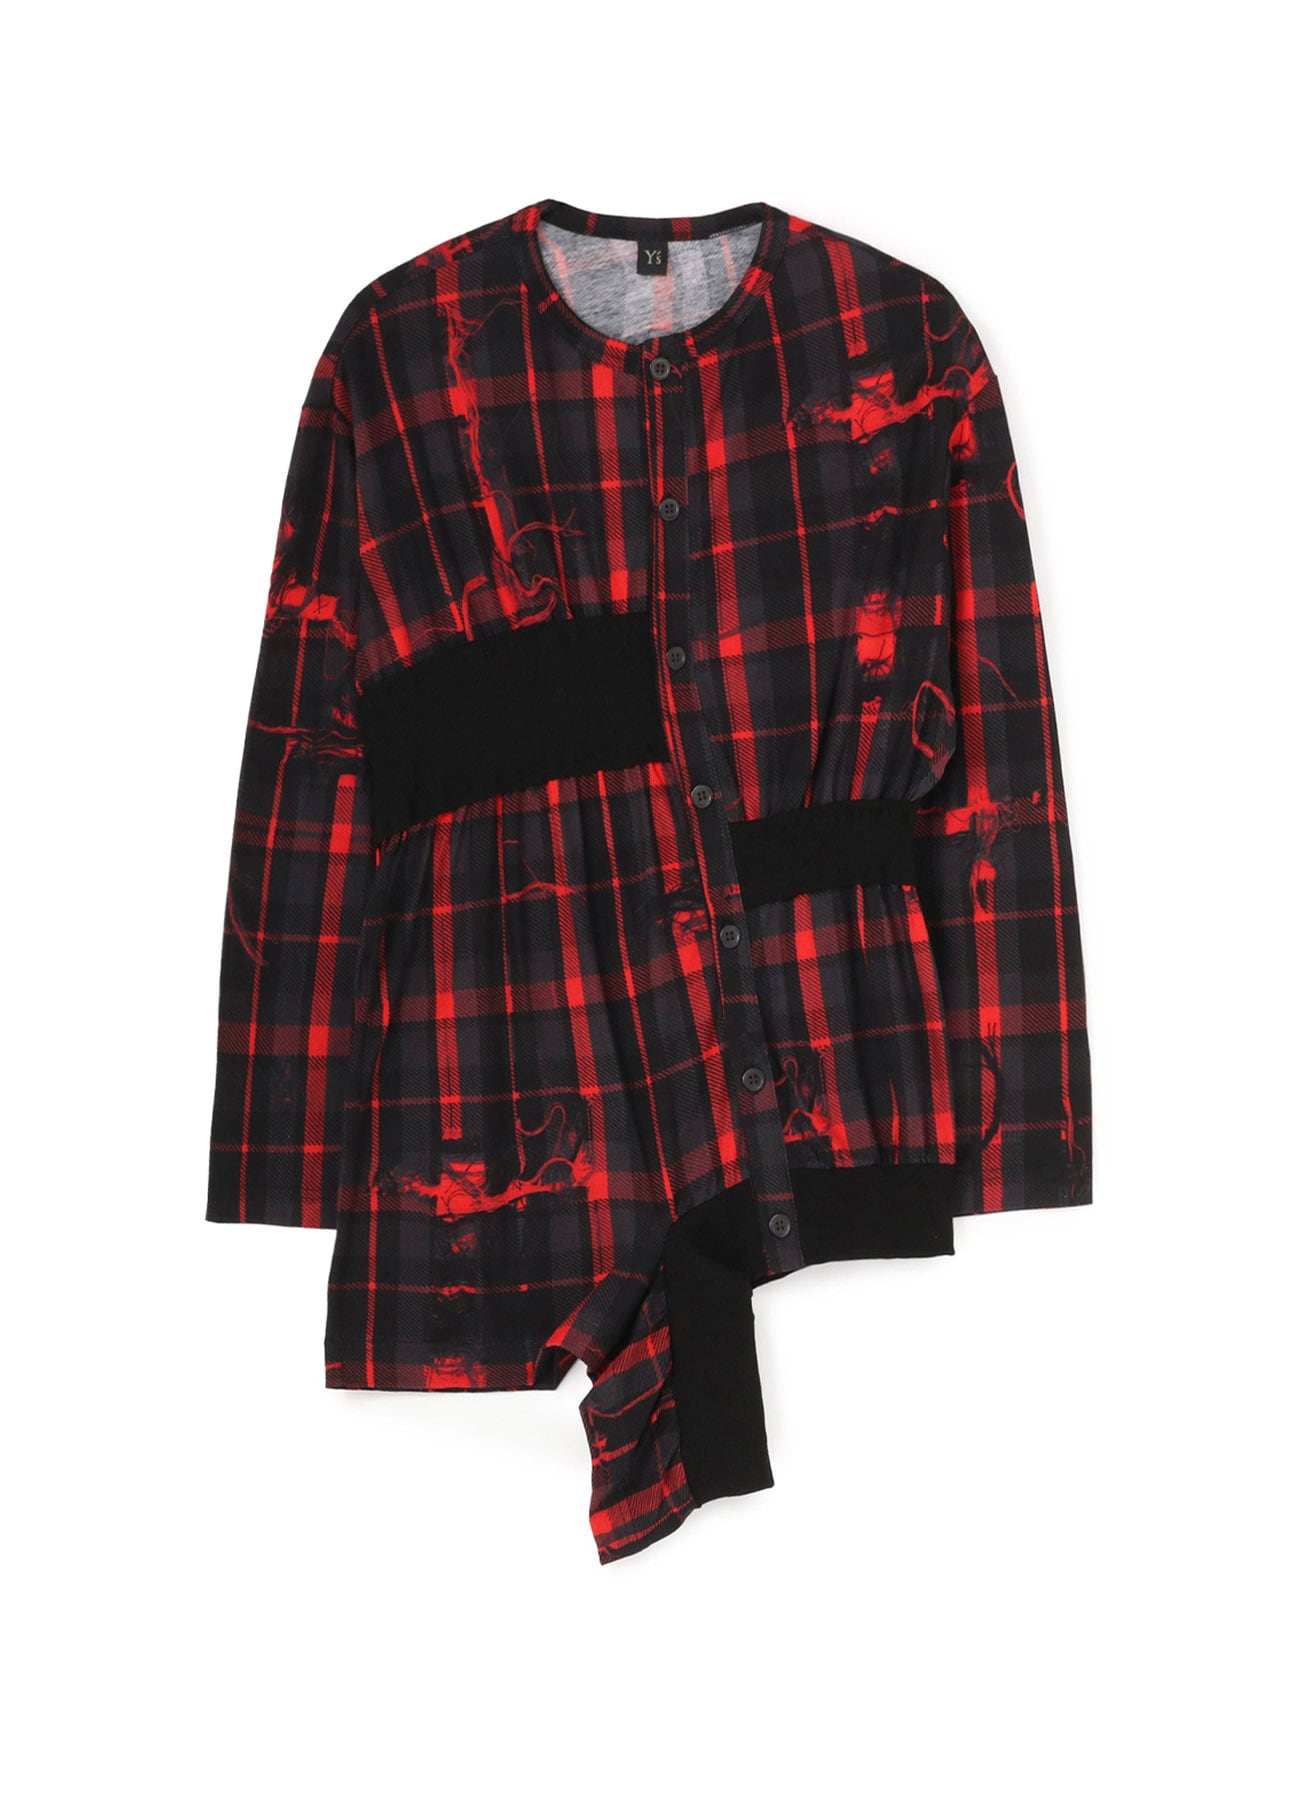 TWISTED CHECK DESIGN GATHER BLOUSE(S Red): Vintage 1.1 